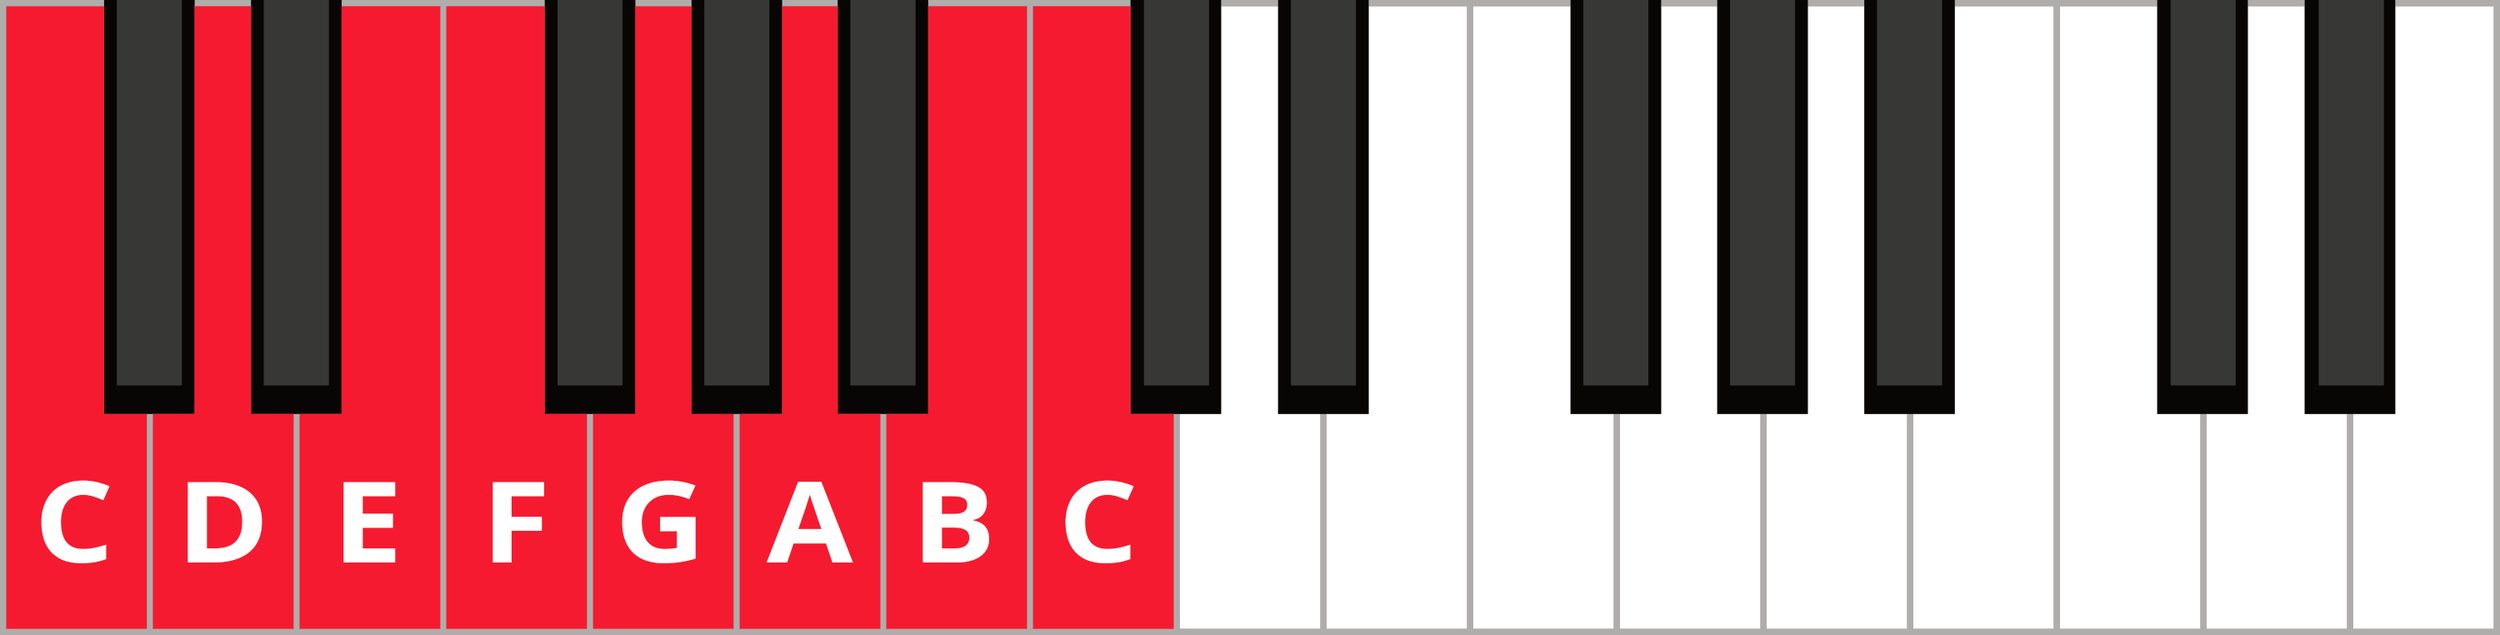 Keyboard diagram of a C major scale with C major notes highlighted in red and labelled.